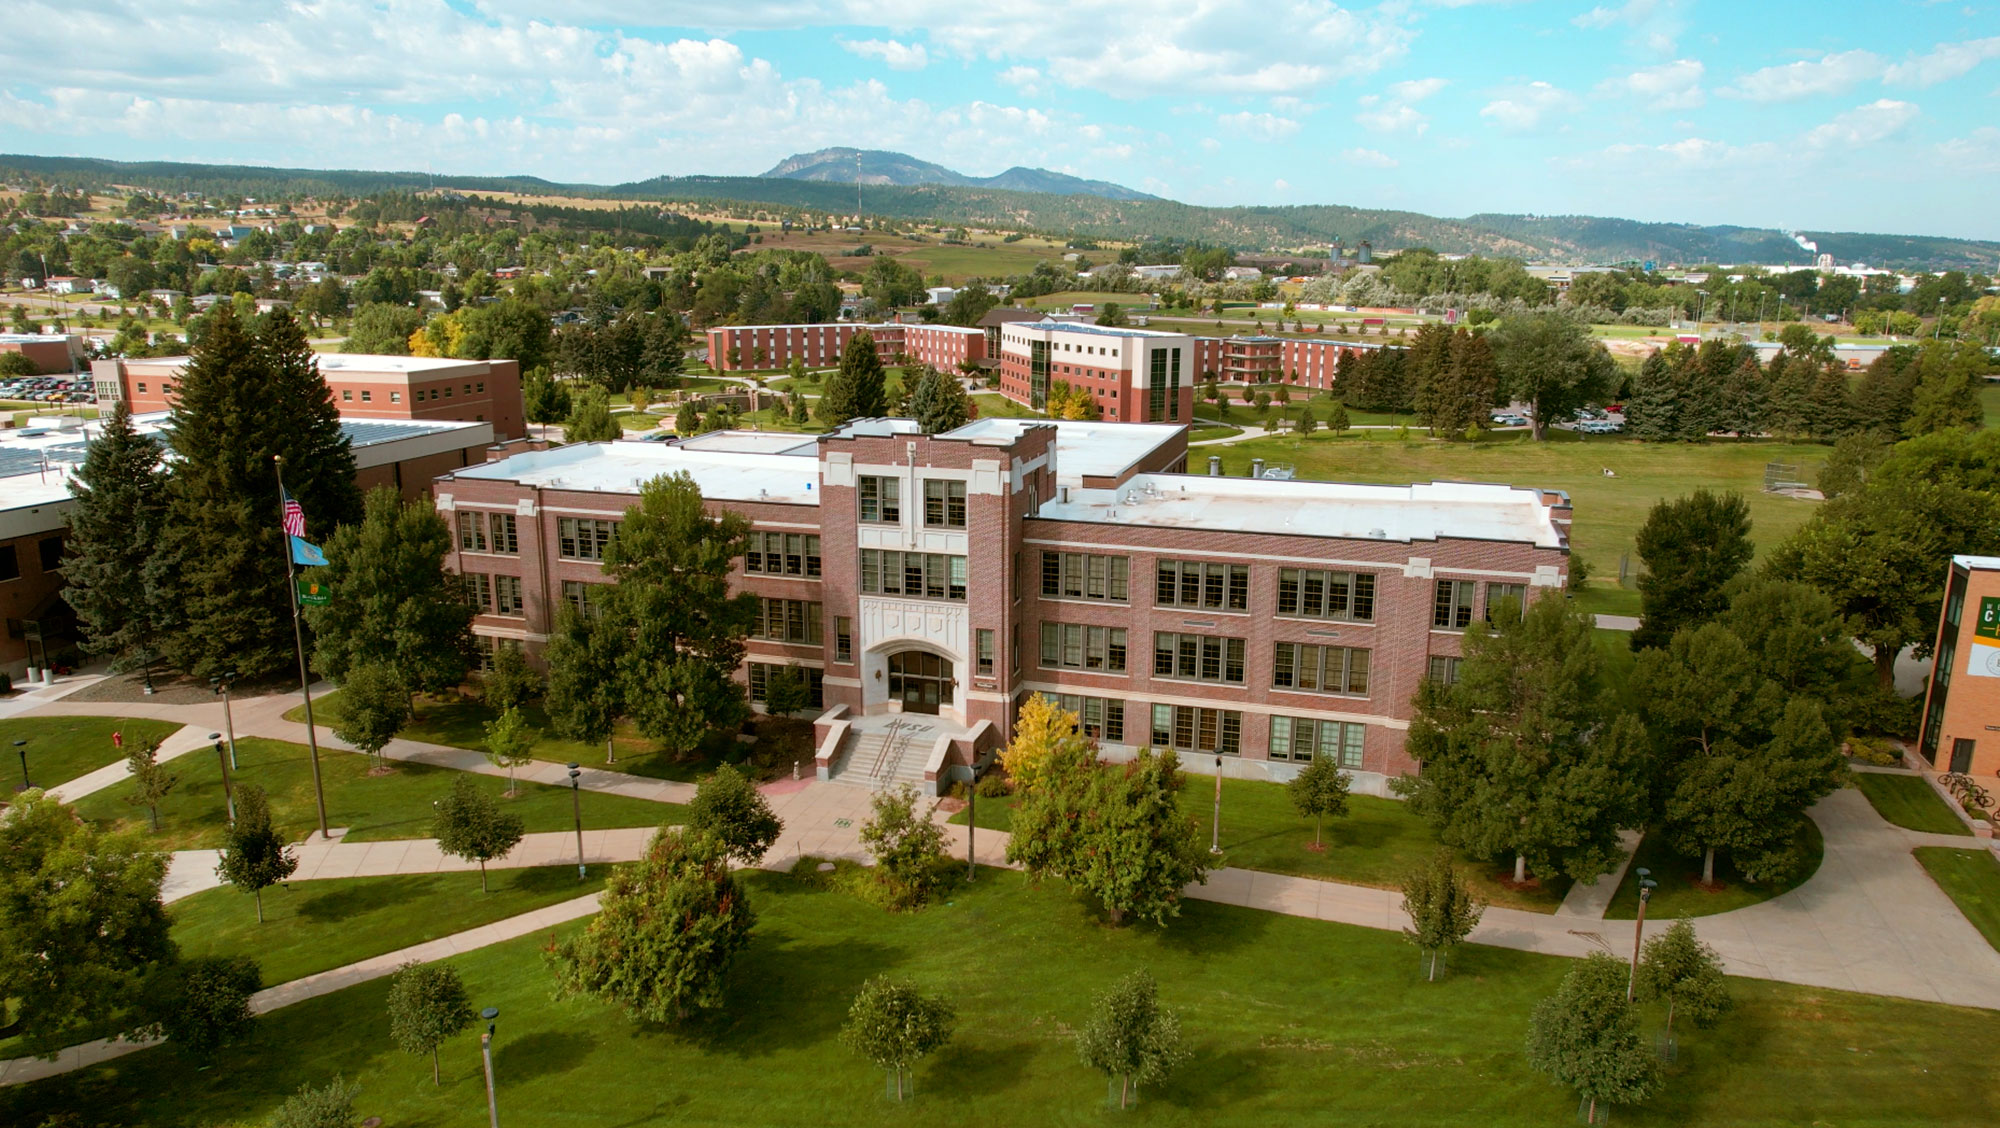 Aerial shot of Woodburn and BHSU campus with Crow Peak in the background.